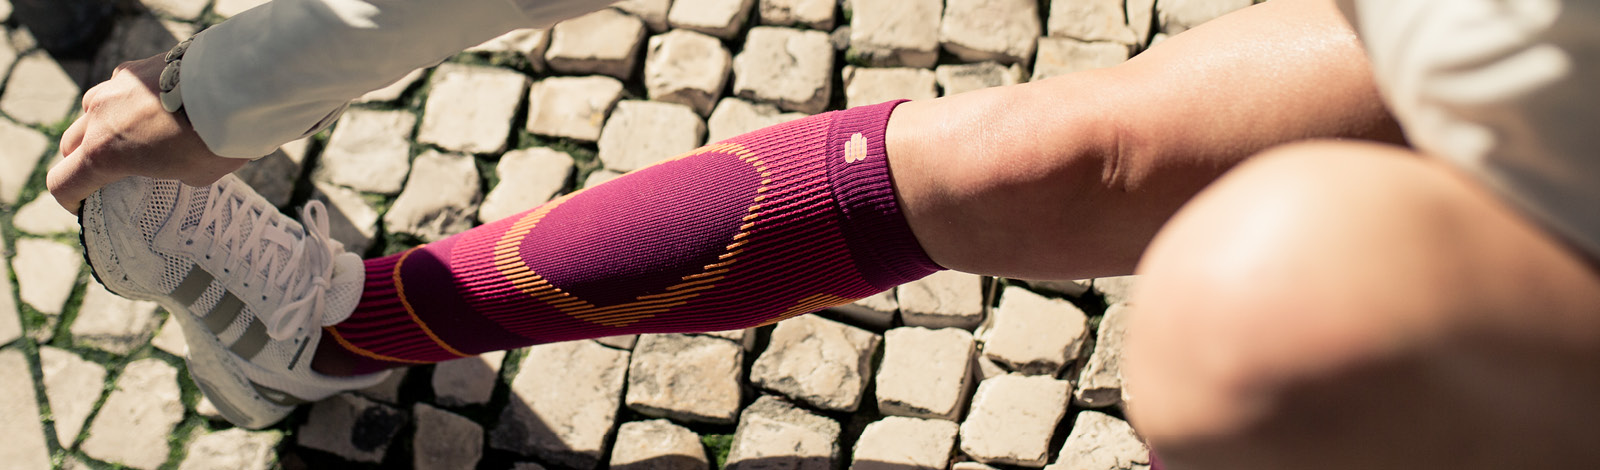 The runner stretches her calf with long running socks in pink